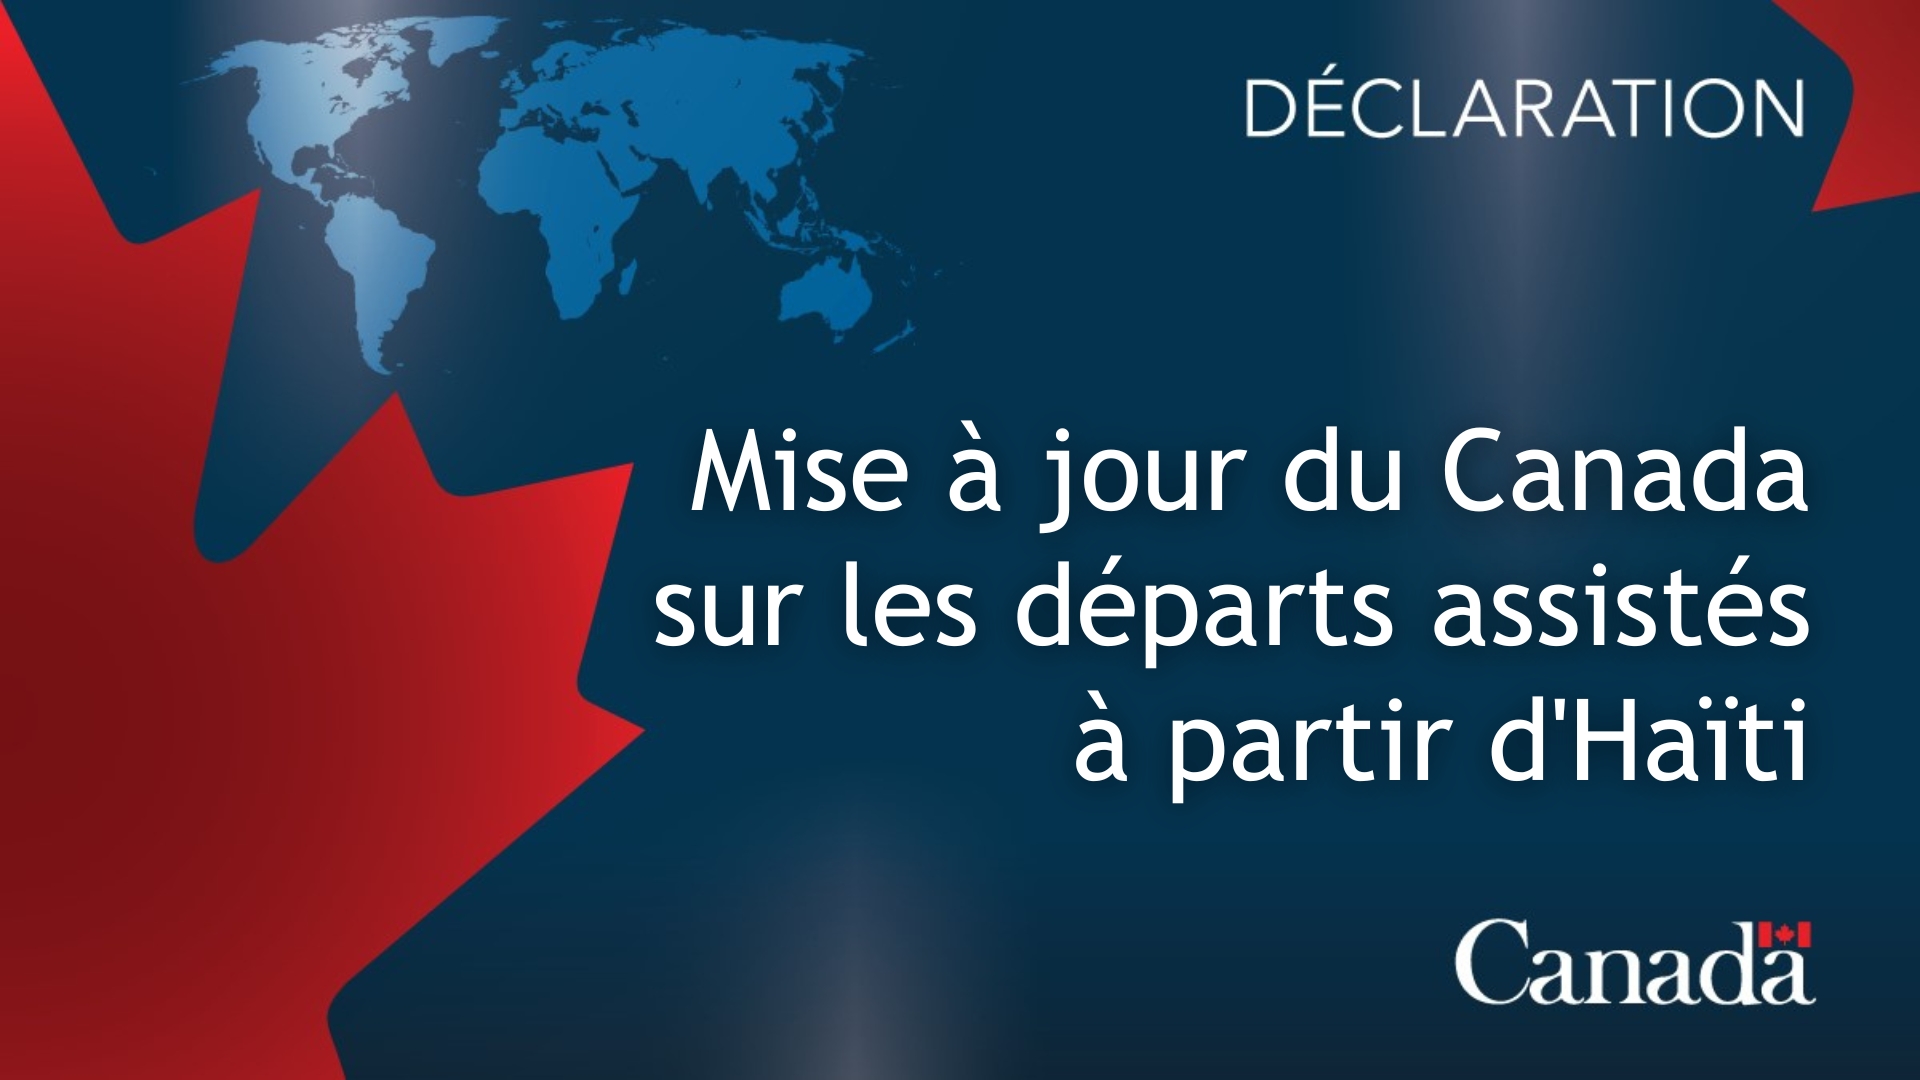 Canada provides current information on assisted departure from Haiti